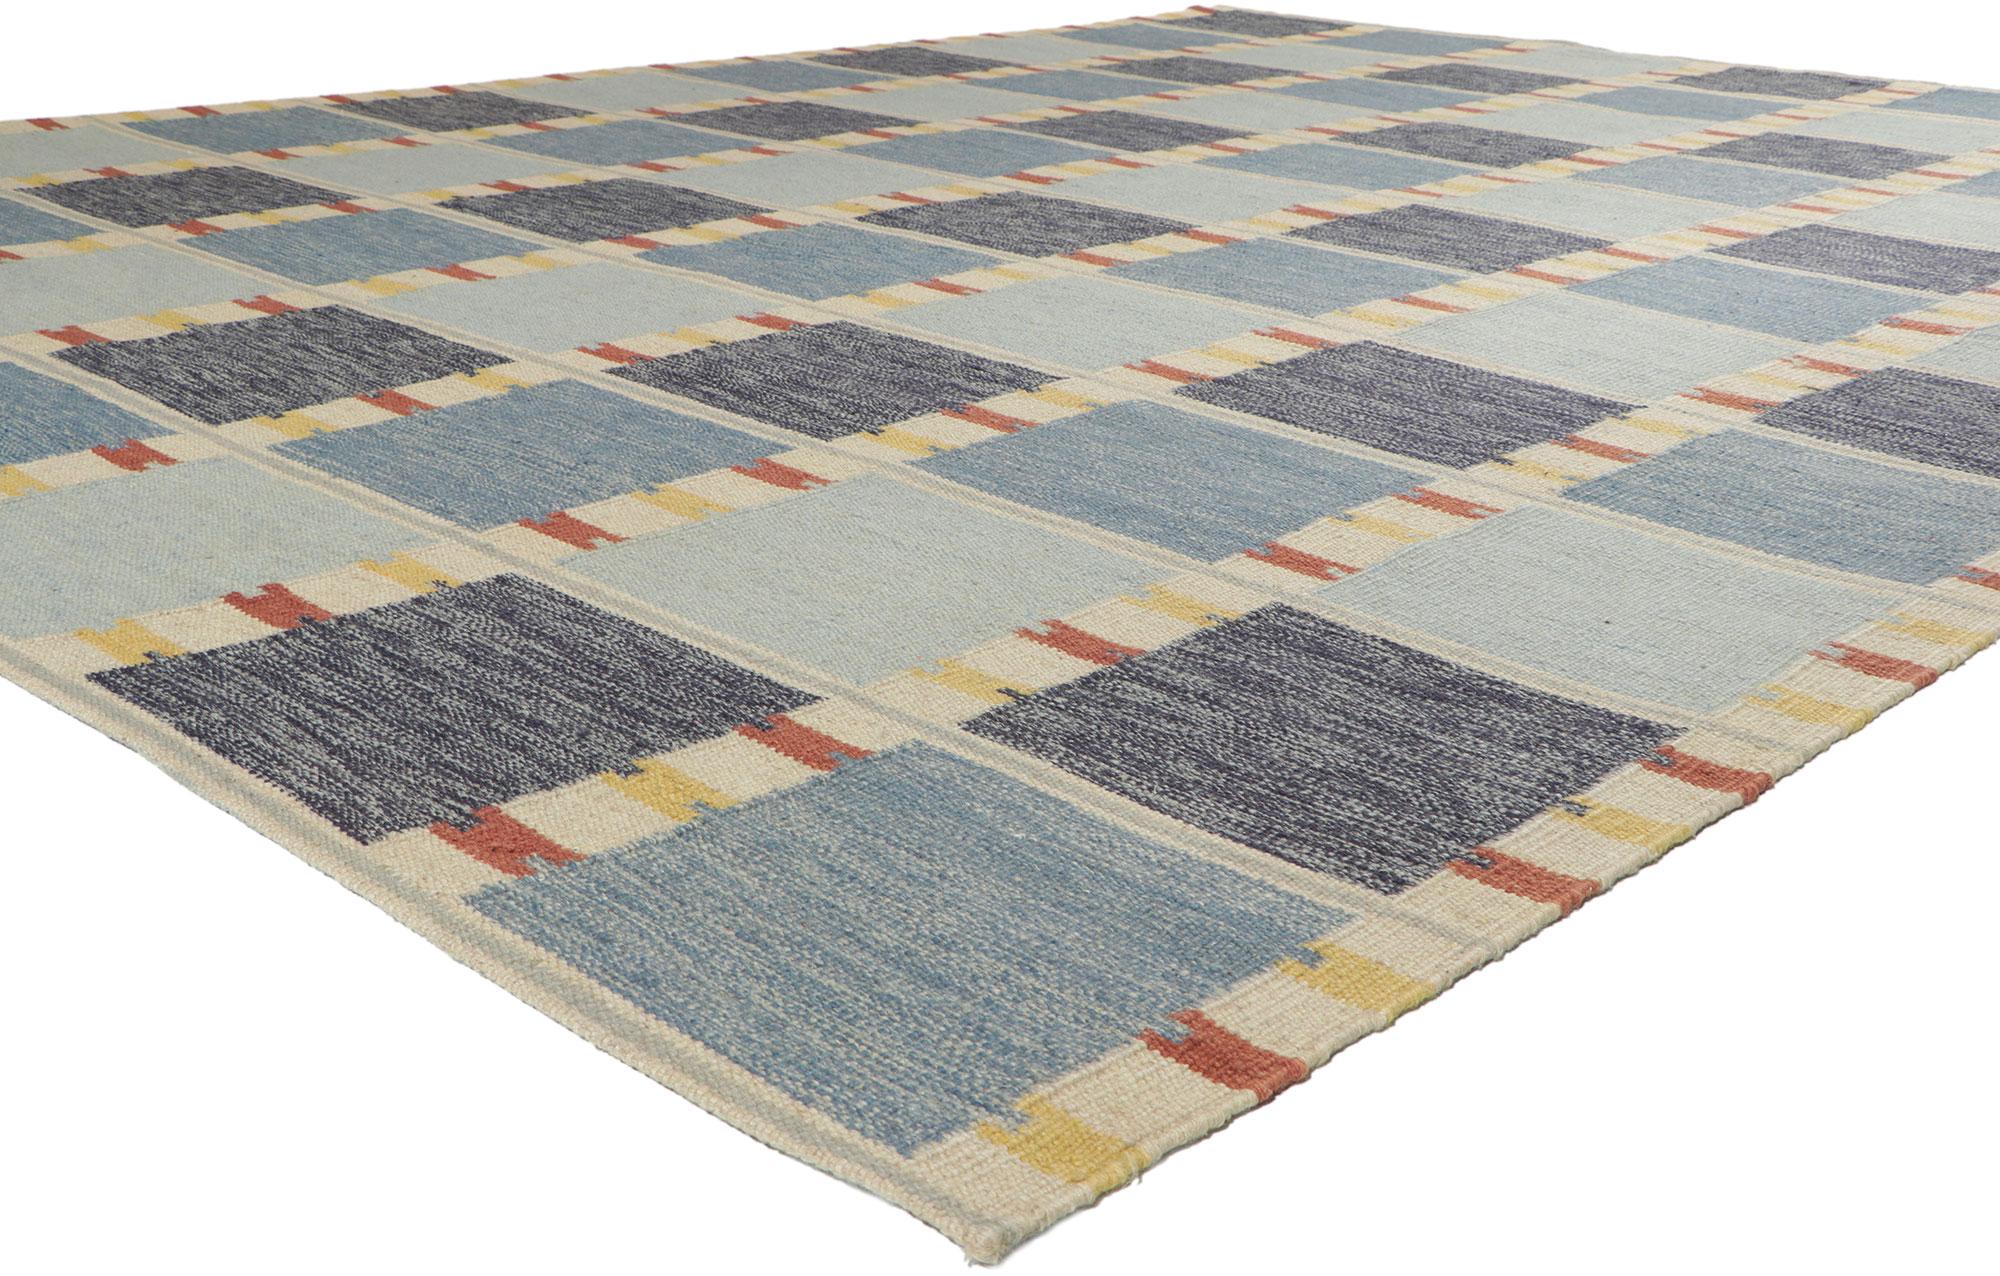 30853 New Barbro Nilsson Swedish Inspired Kilim Rug, 10'03 x 13'08. Emanating Scandinavian Modern style with incredible detail and texture, this handwoven Swedish style kilim rug is a captivating vision of woven beauty. The eye-catching check